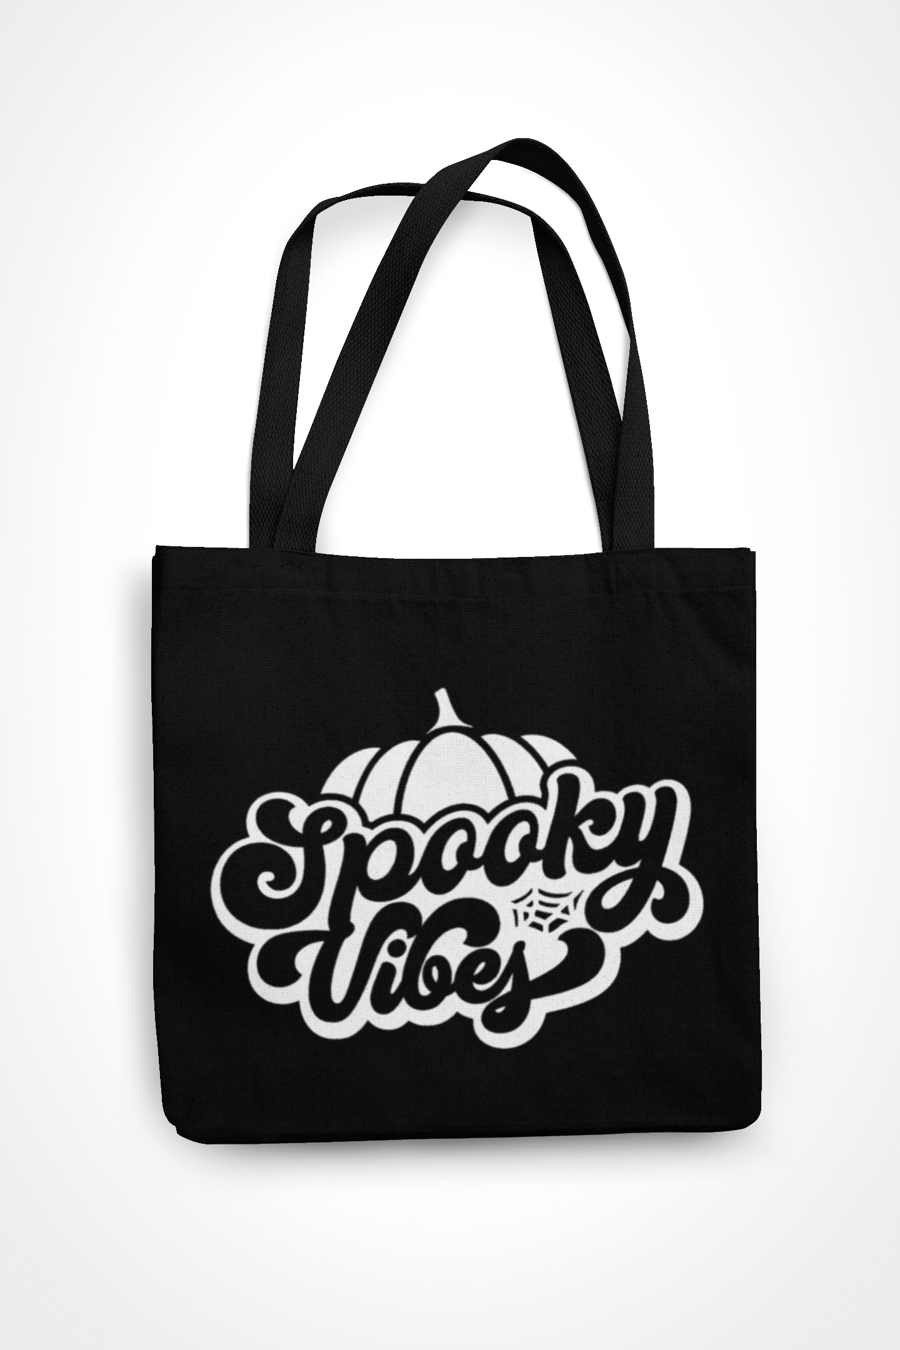 Spooky Vibes Tote Bag -Halloween Witch themed  Shopper Bag